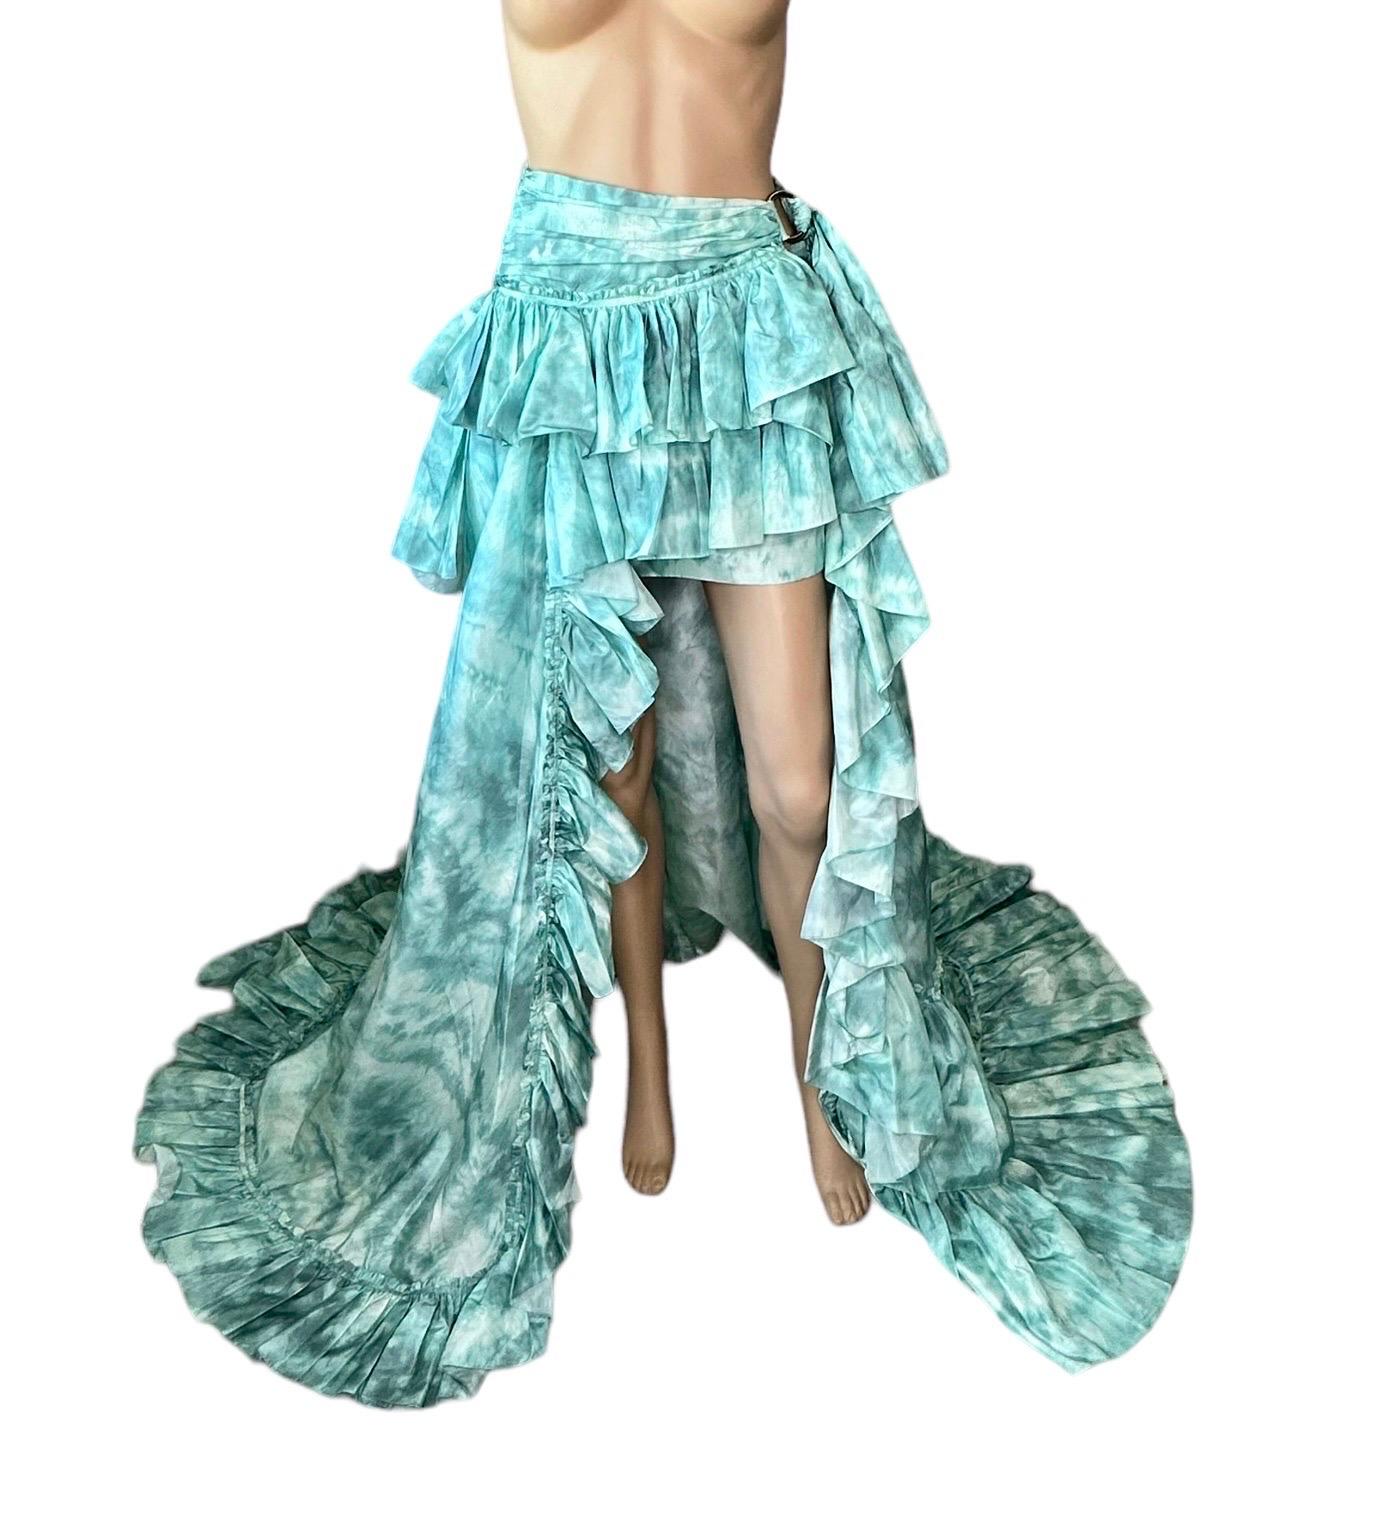 Roberto Cavalli S/S 2016 Runway Asymmetric High-Low Tie Dye Ruffled Train Skirt In Excellent Condition For Sale In Naples, FL